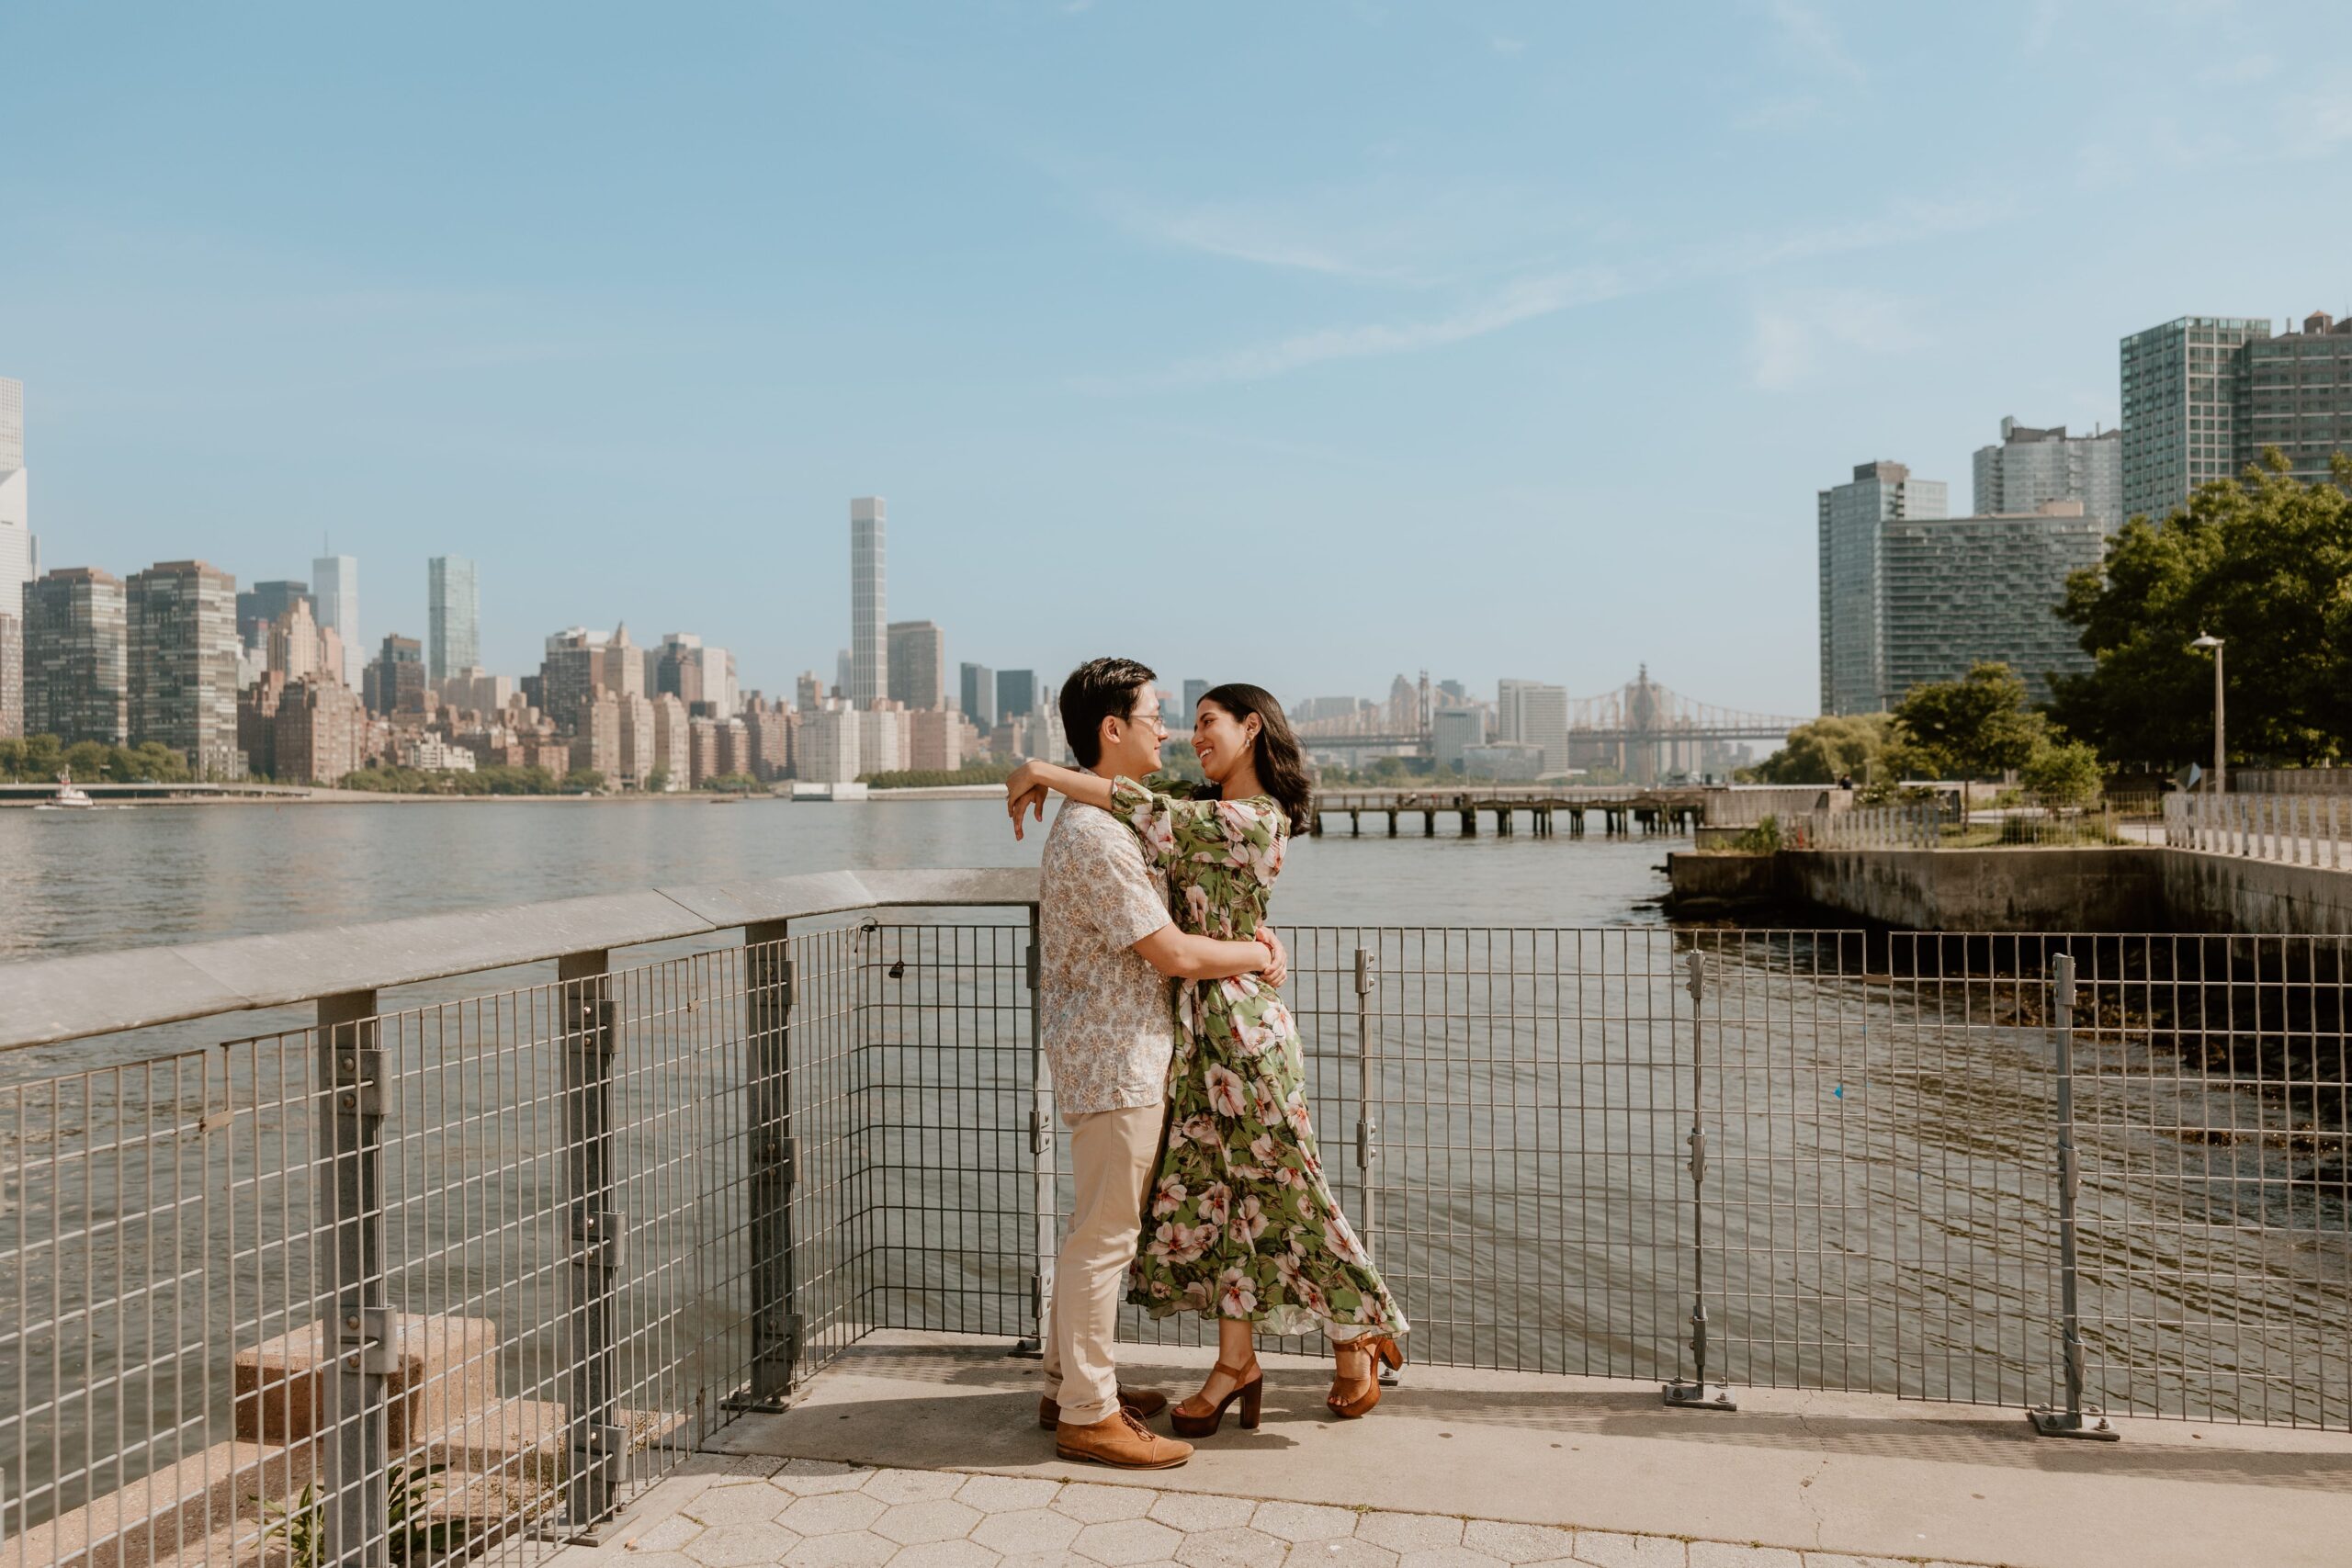 Sam and Mark embracing on a waterfront pier with the NYC skyline in the background at Gantry Plaza State Park during their engagement session.